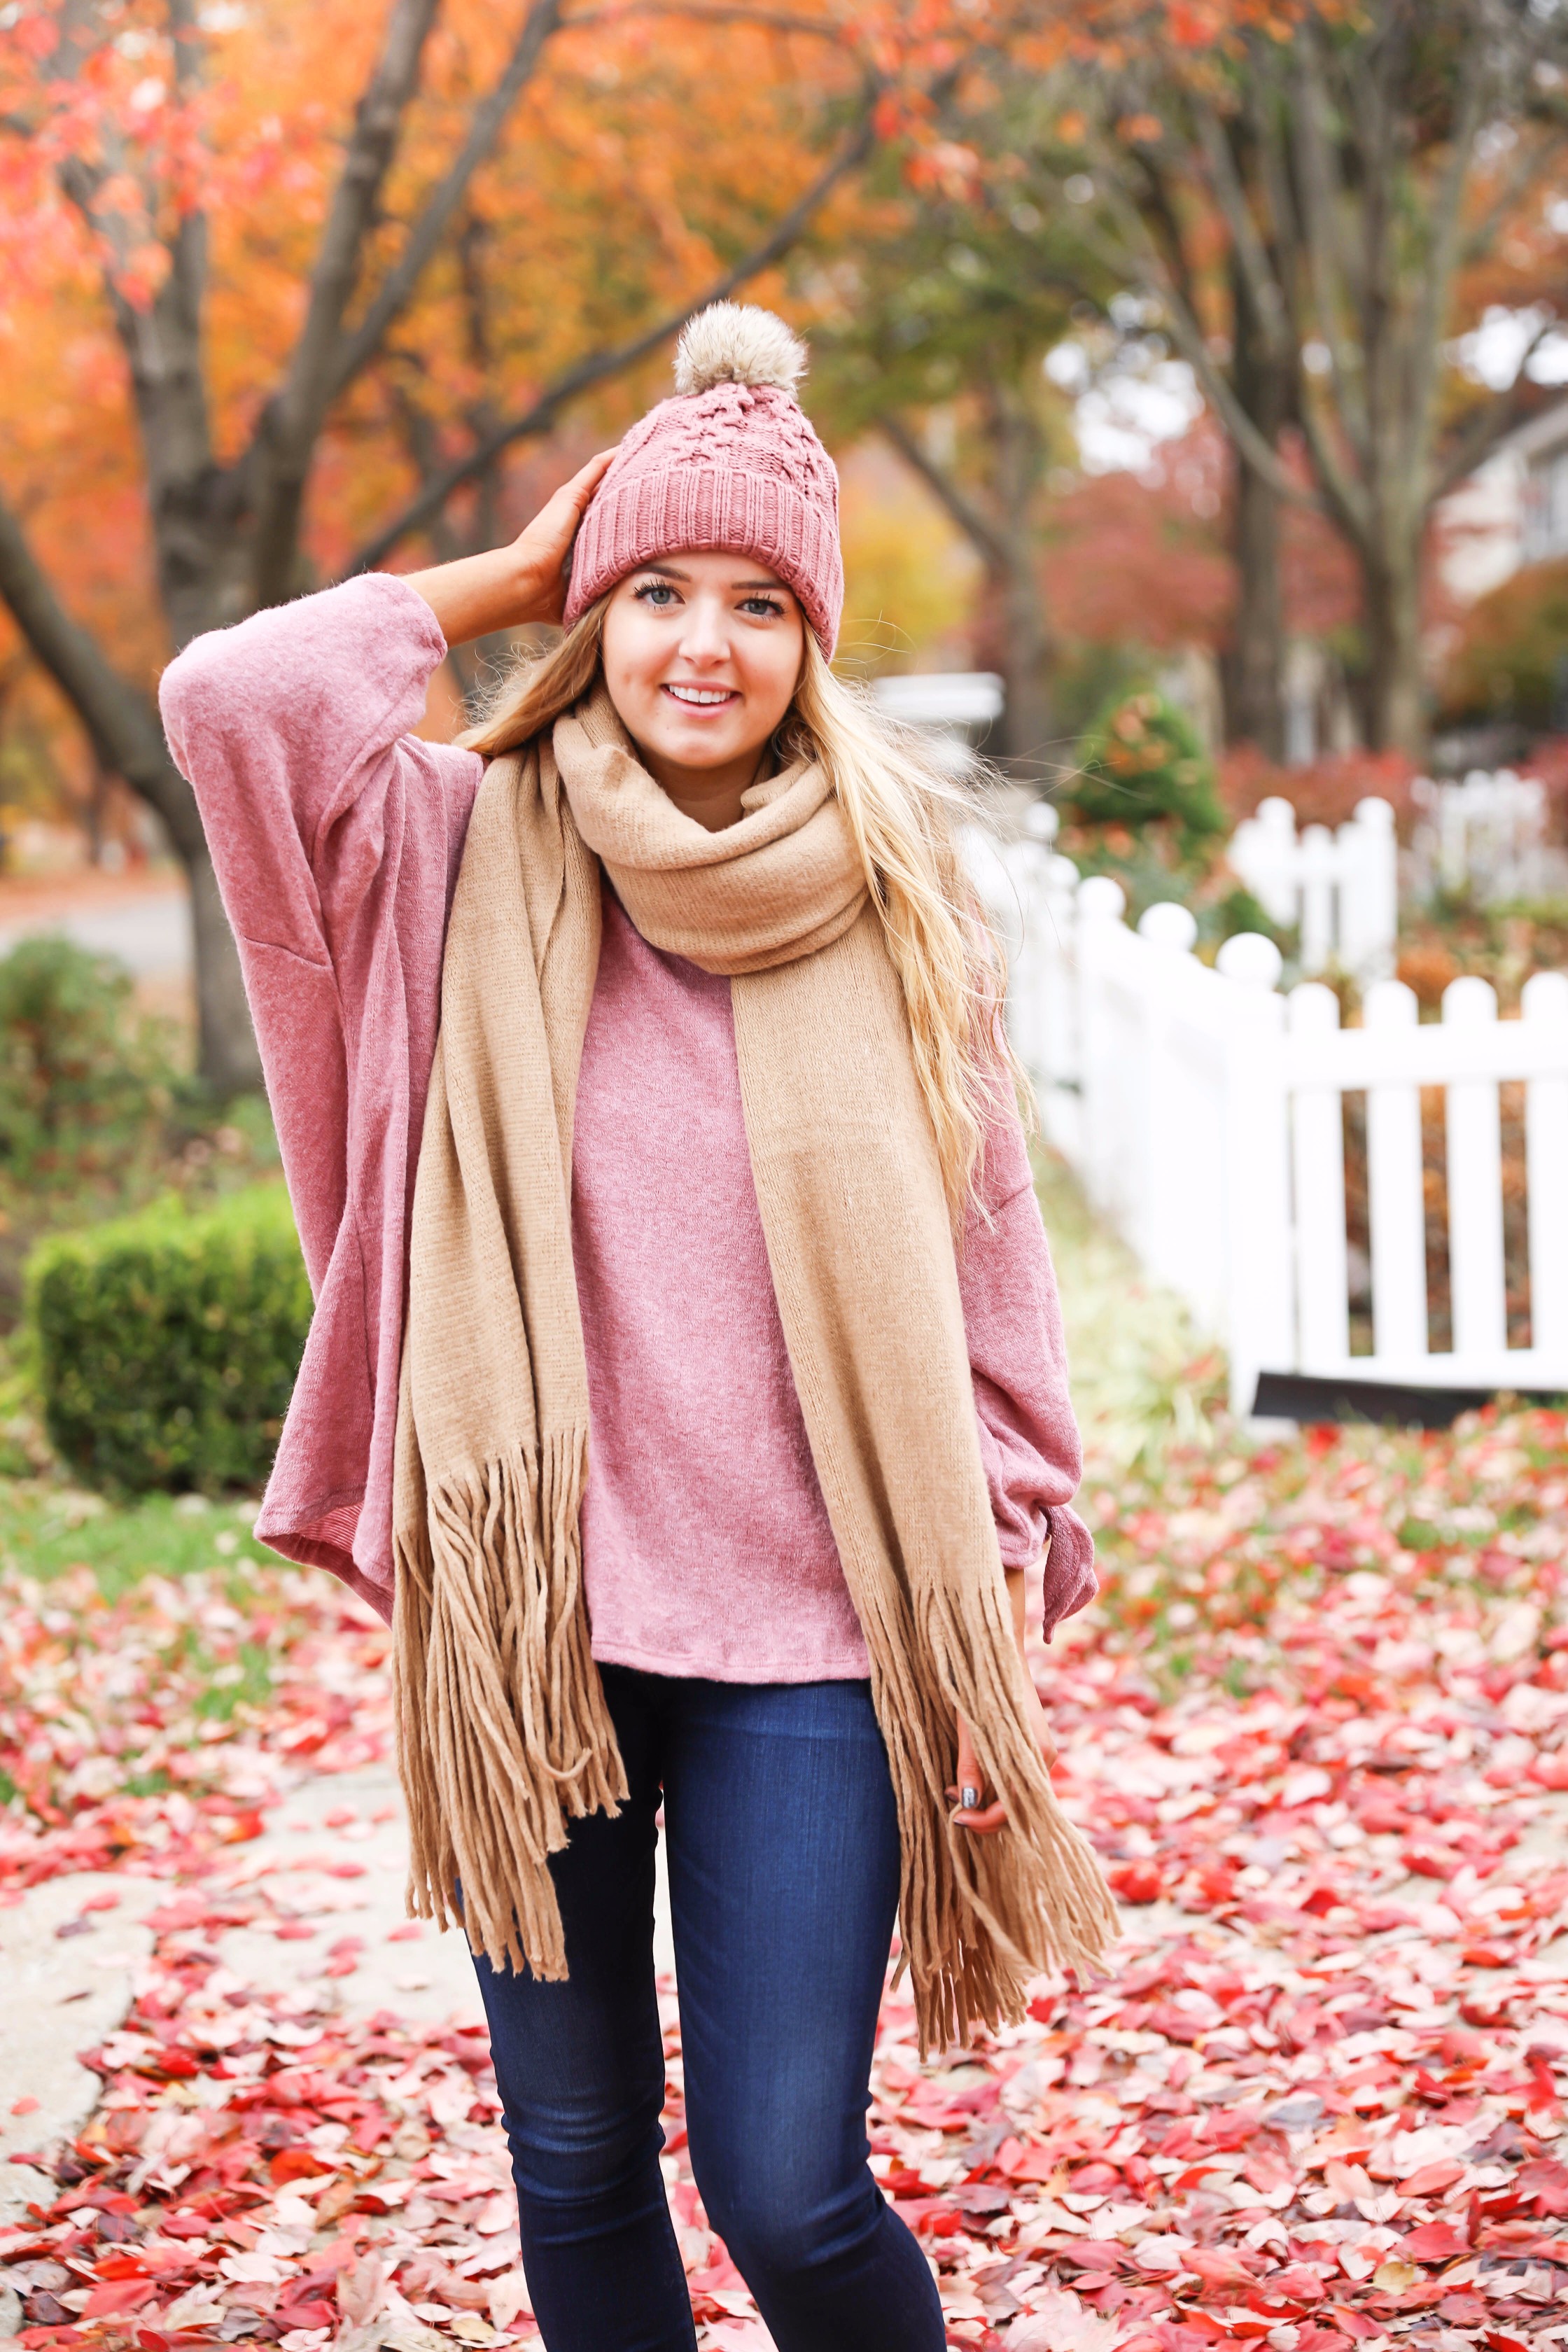 Big fringe scarf with pink tied sweater and pink beanie! Perfect girly fall outfit! Find details on fashion blog daily dose of charm by lauren lindmark